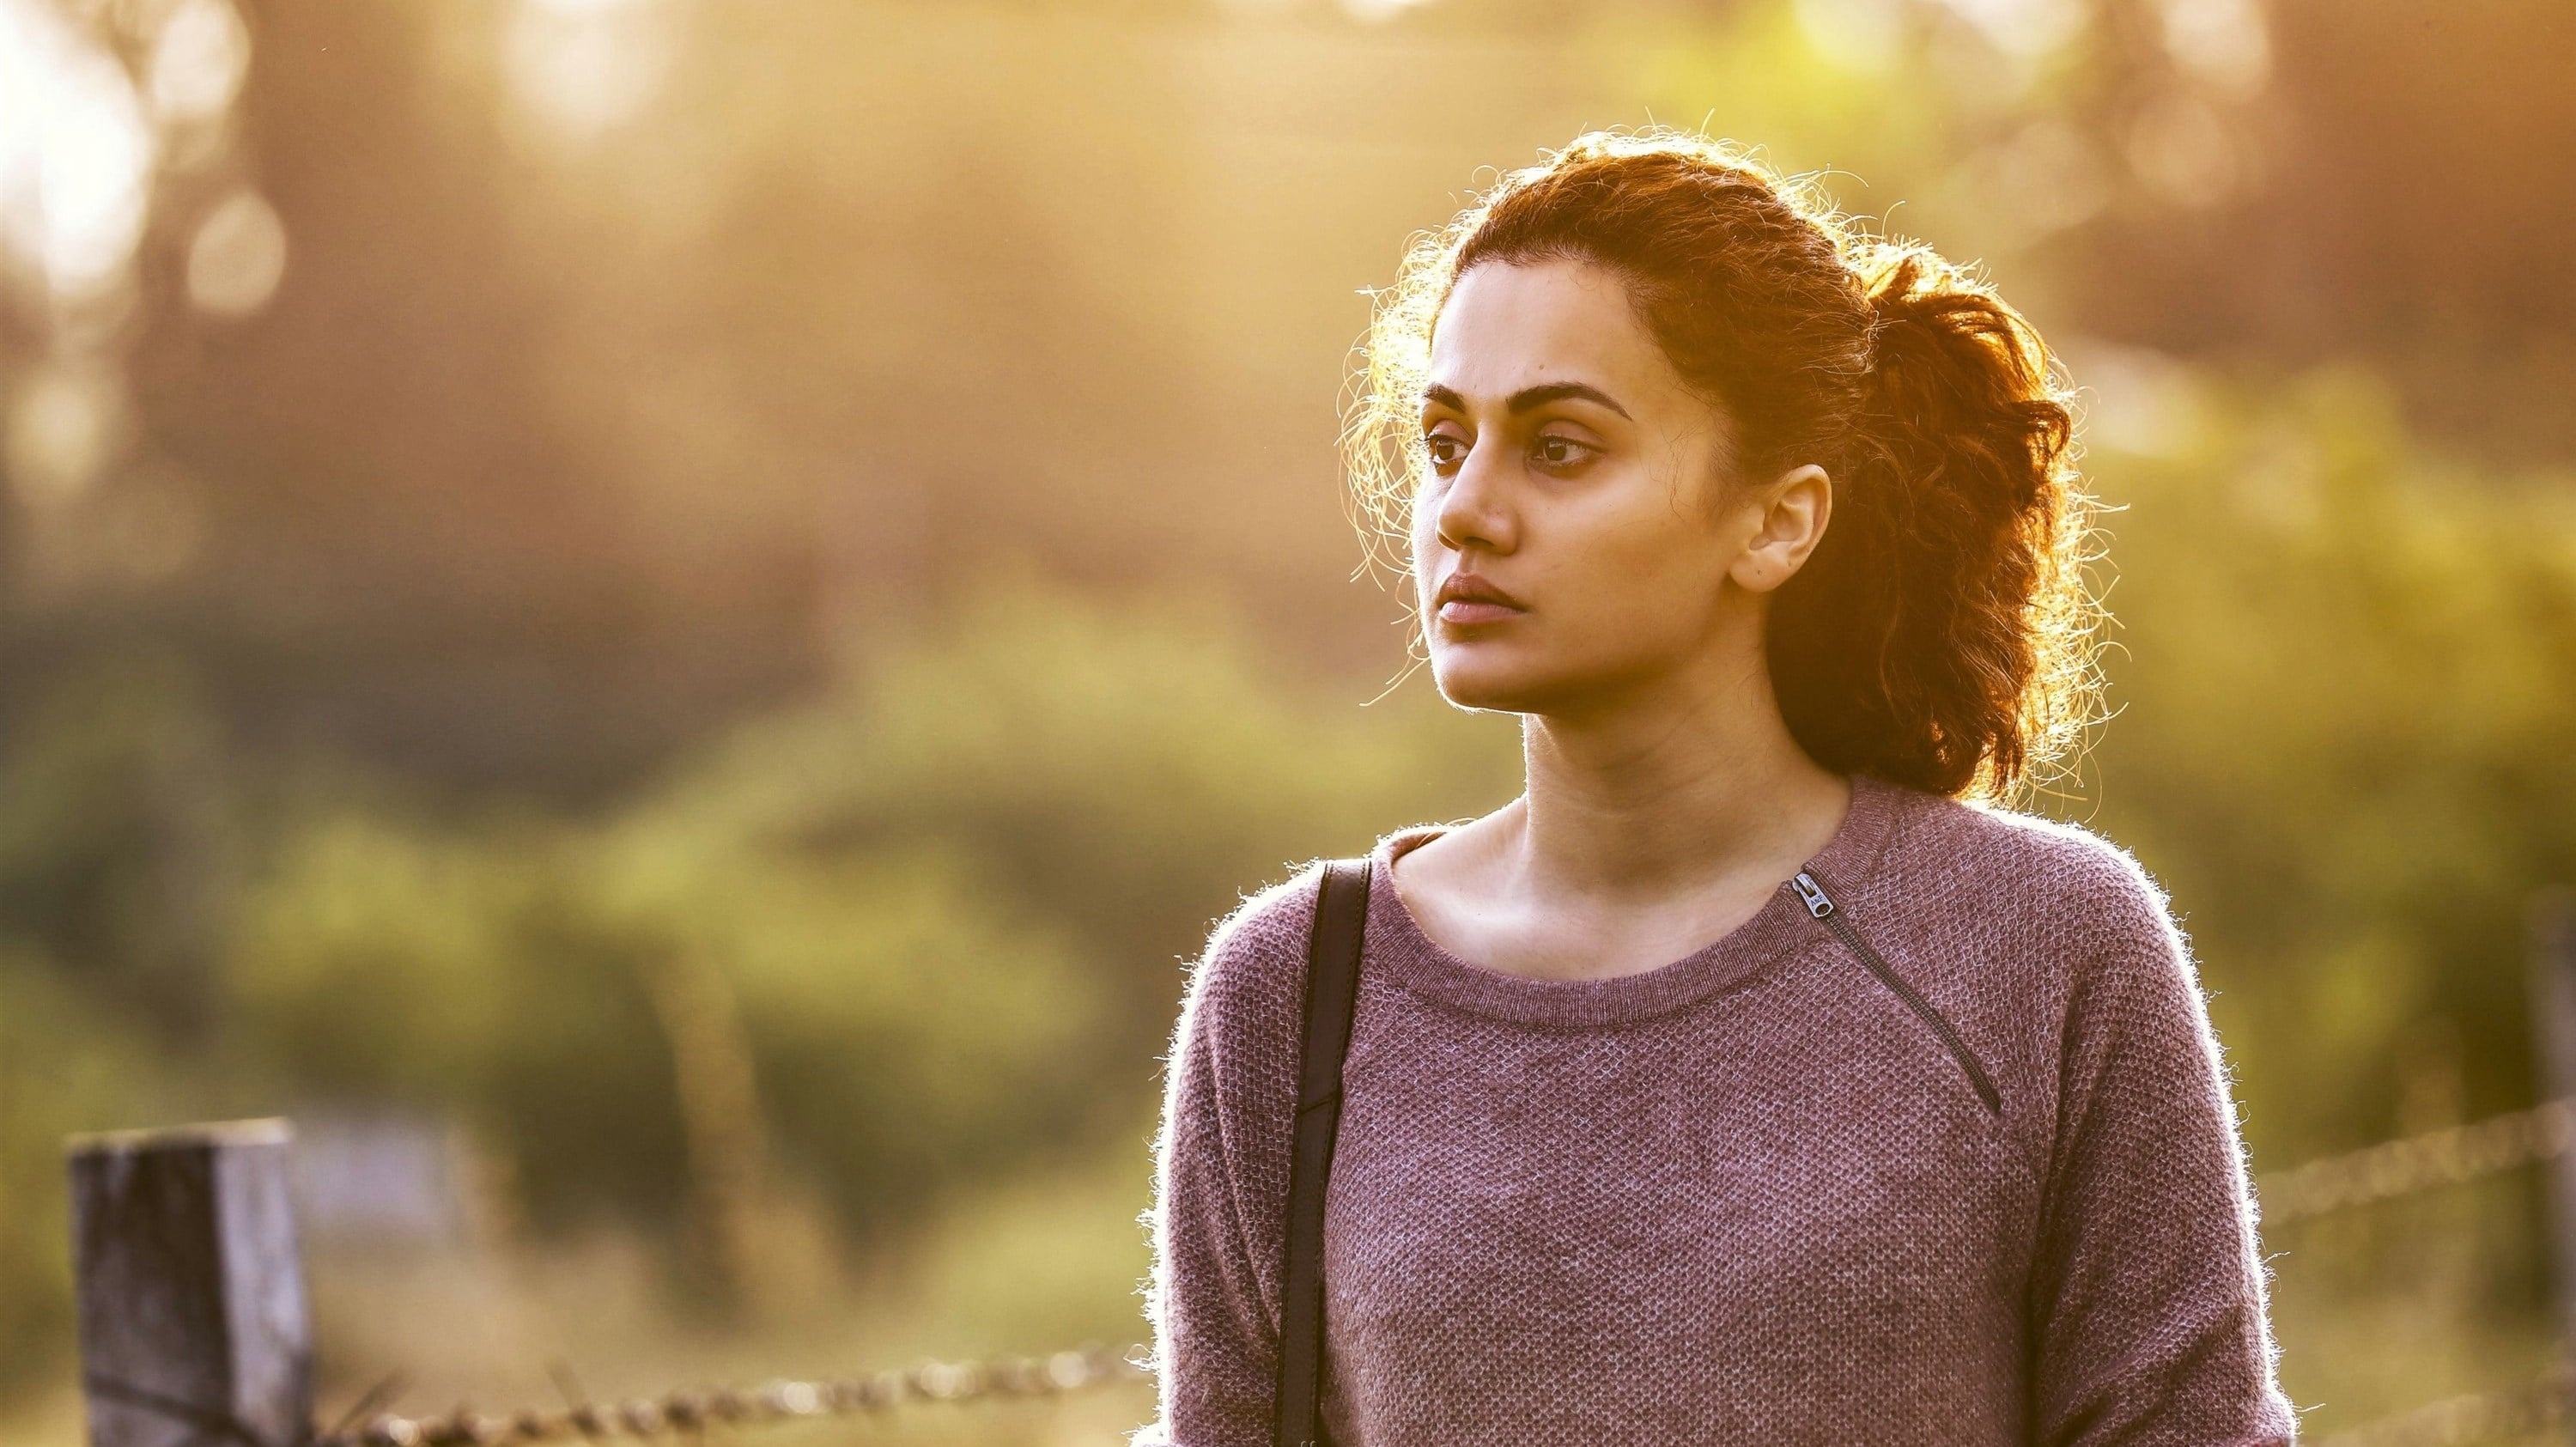 taapsee pannu, movie, game over, actress, brunette, depth of field, indian